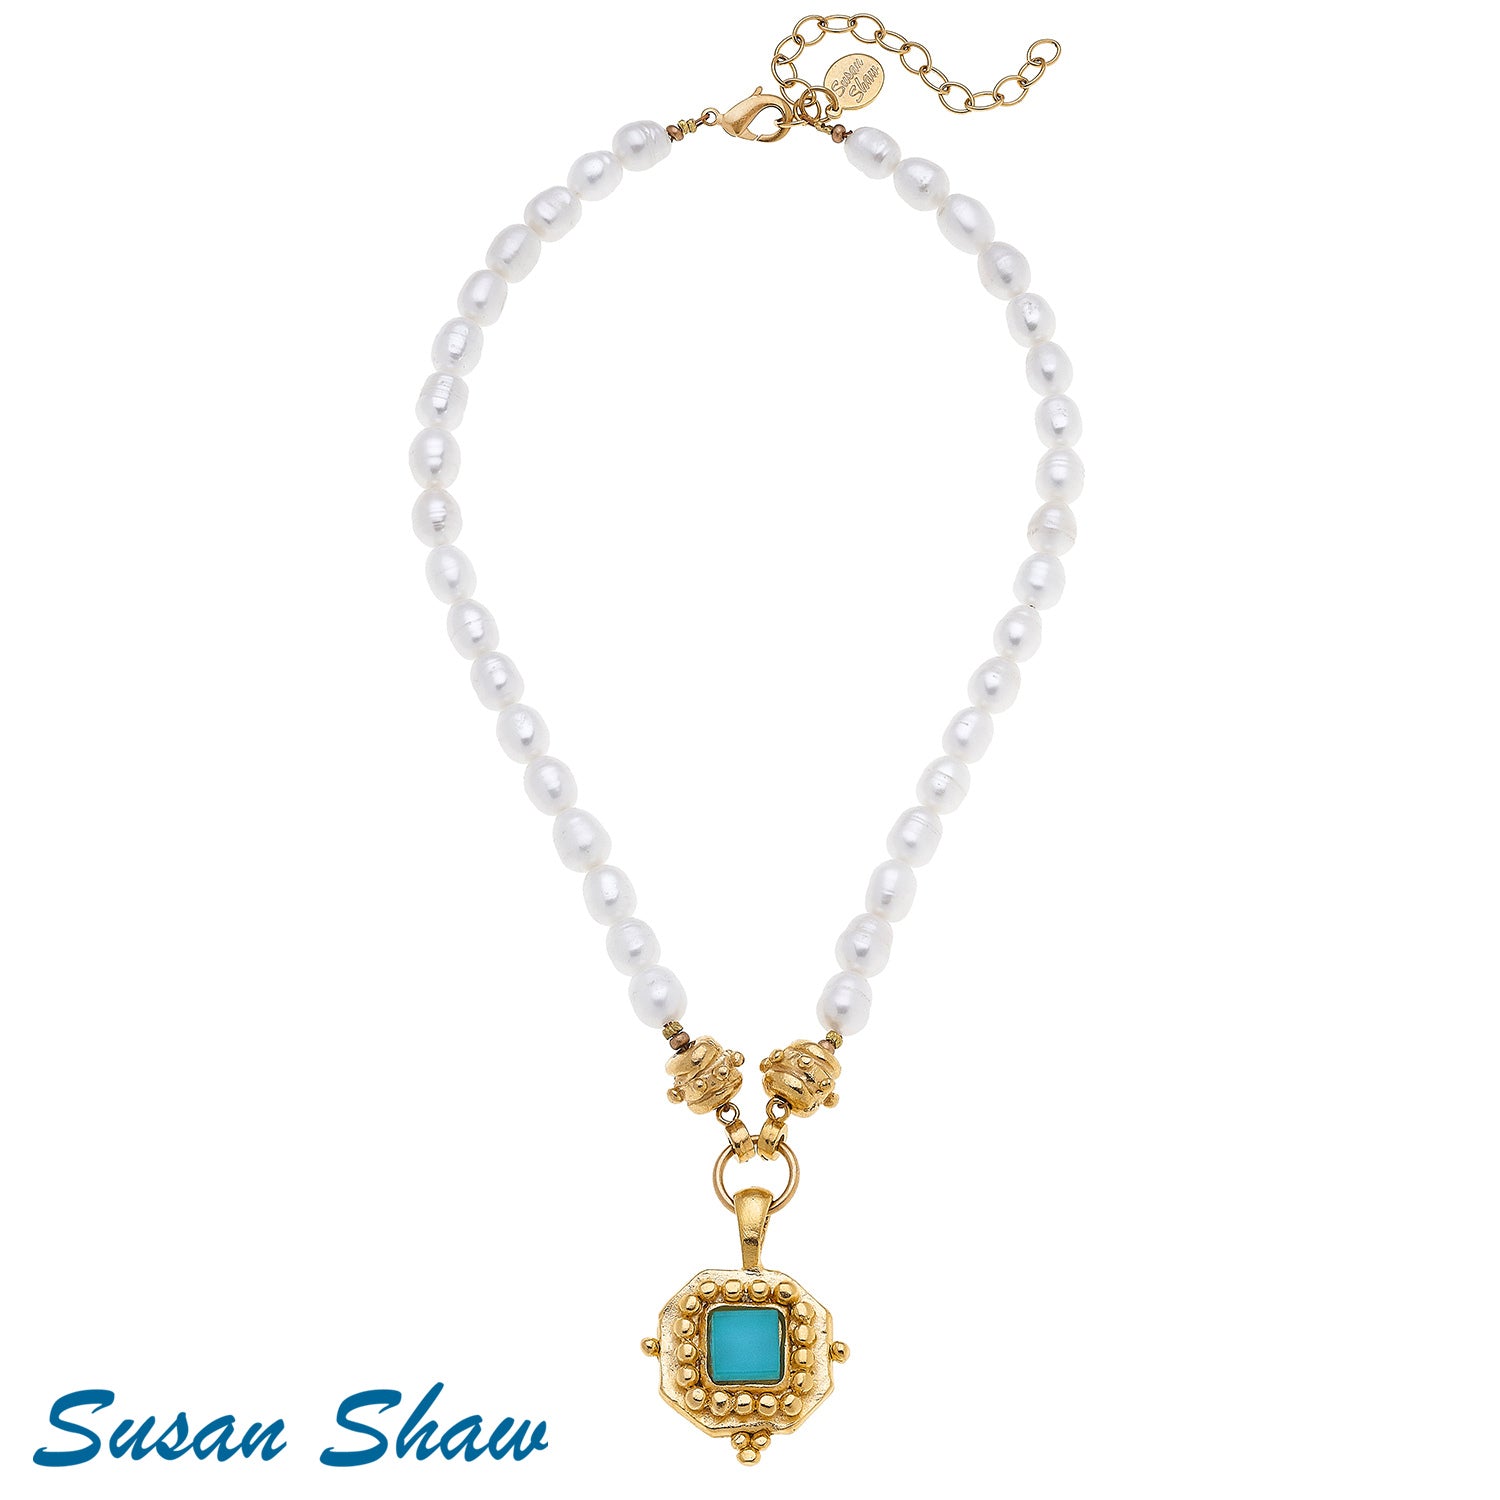 Susan Shaw Handcast Gold Square with Teal French Glass on Genuine Pearl Necklace